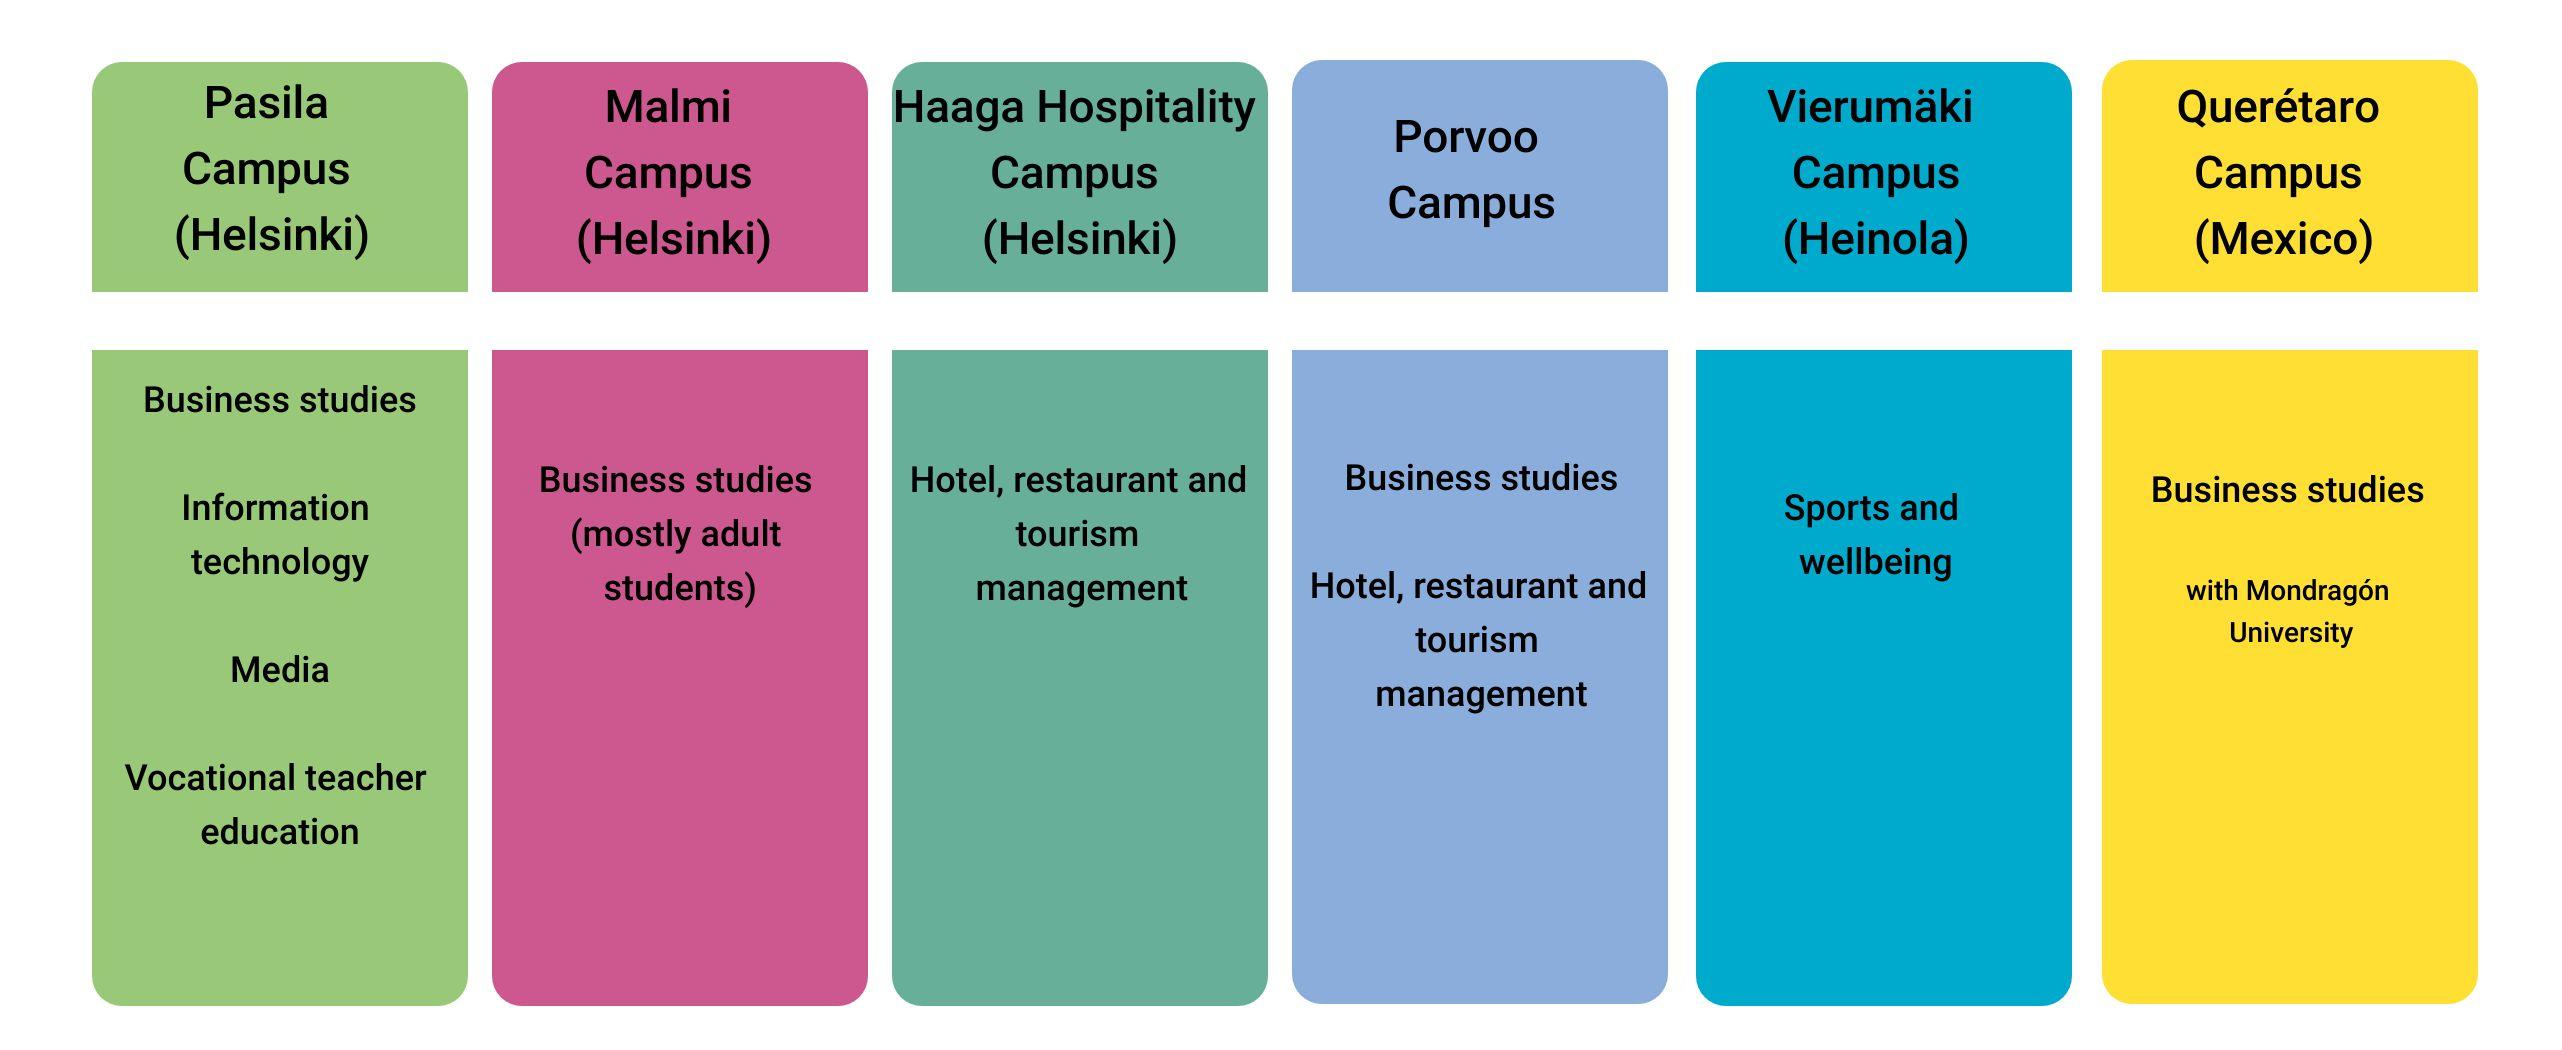 Picture 1. Haaga-Helia's fields of education according to campuses